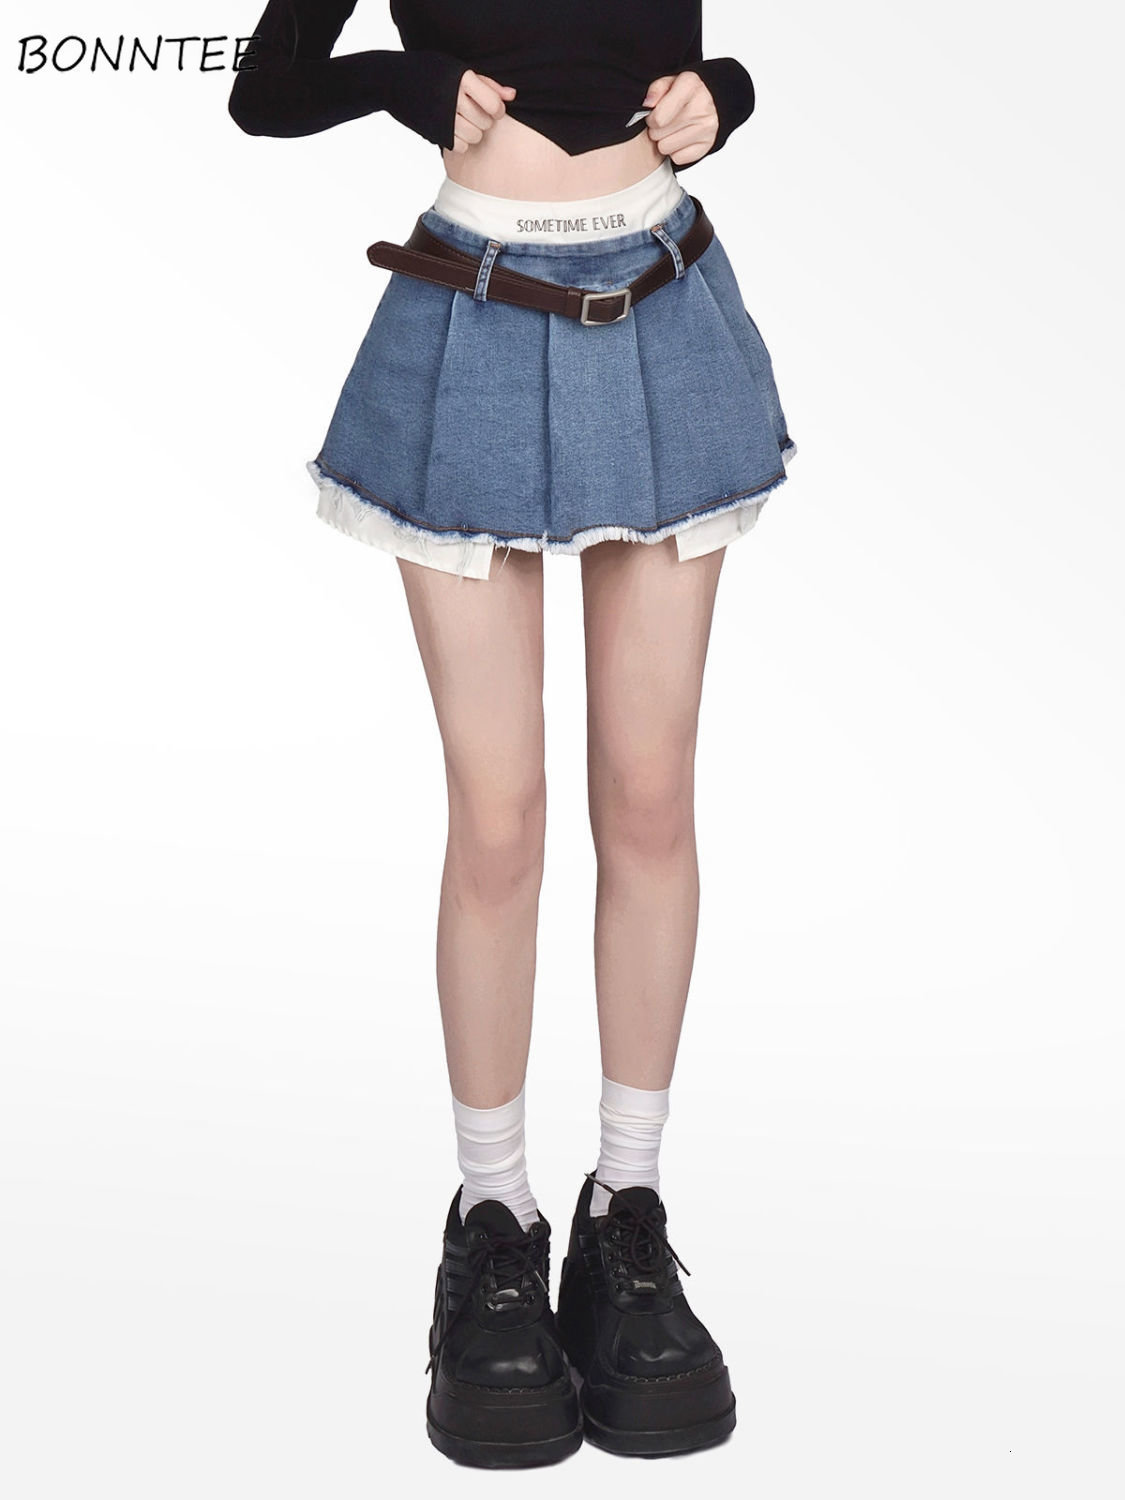 

Skirts Fake Two Pieces Denim with Lining Women Mini Summer Chic Sexy Girls Preppy Ulzzang Ins Pleated Irregular Y2k Streetwear 230410, Beige